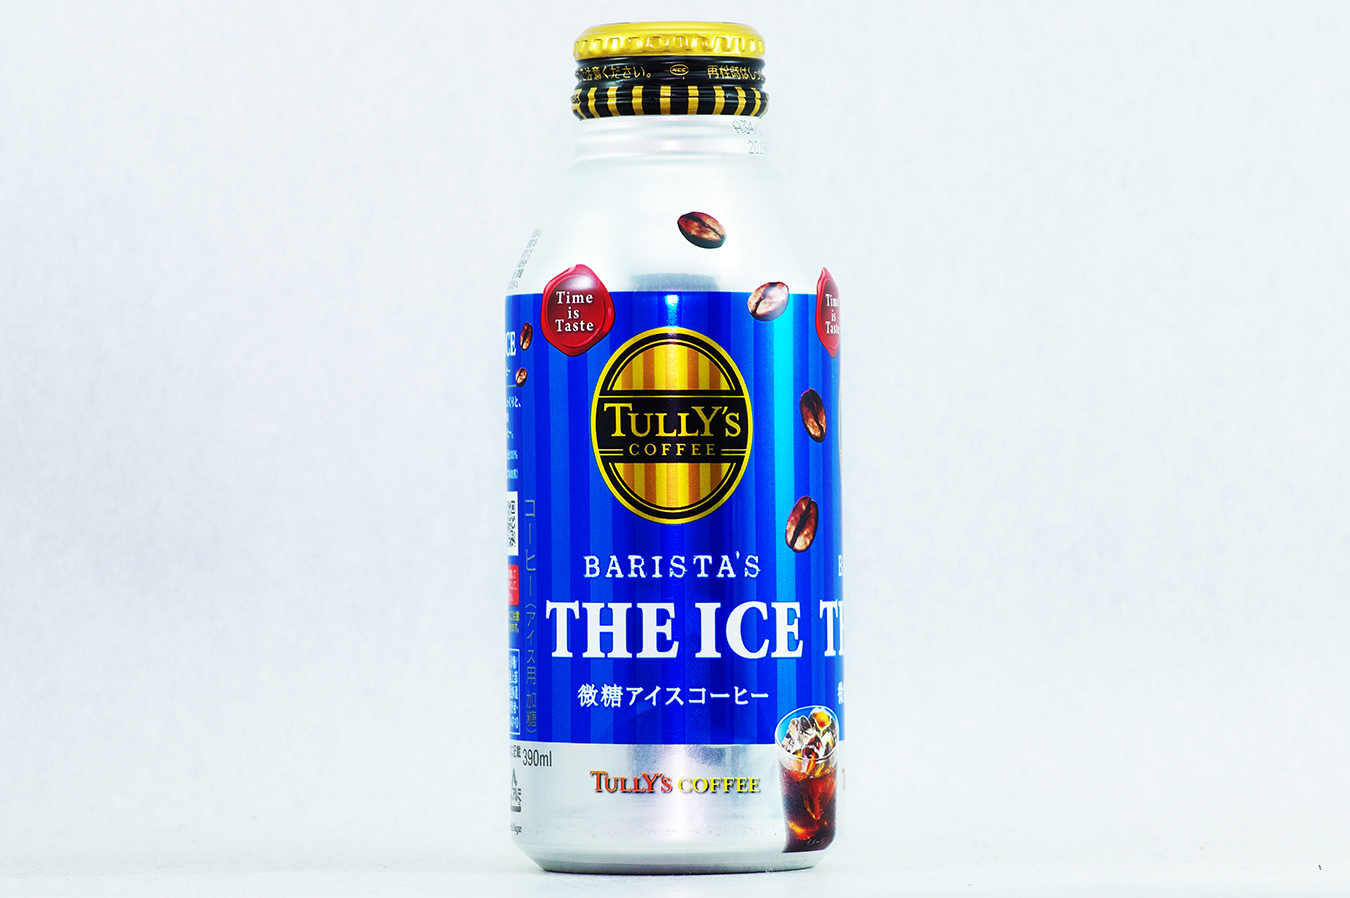 TULLY'S COFFEE BARISTA'S THE ICE 2018年6月